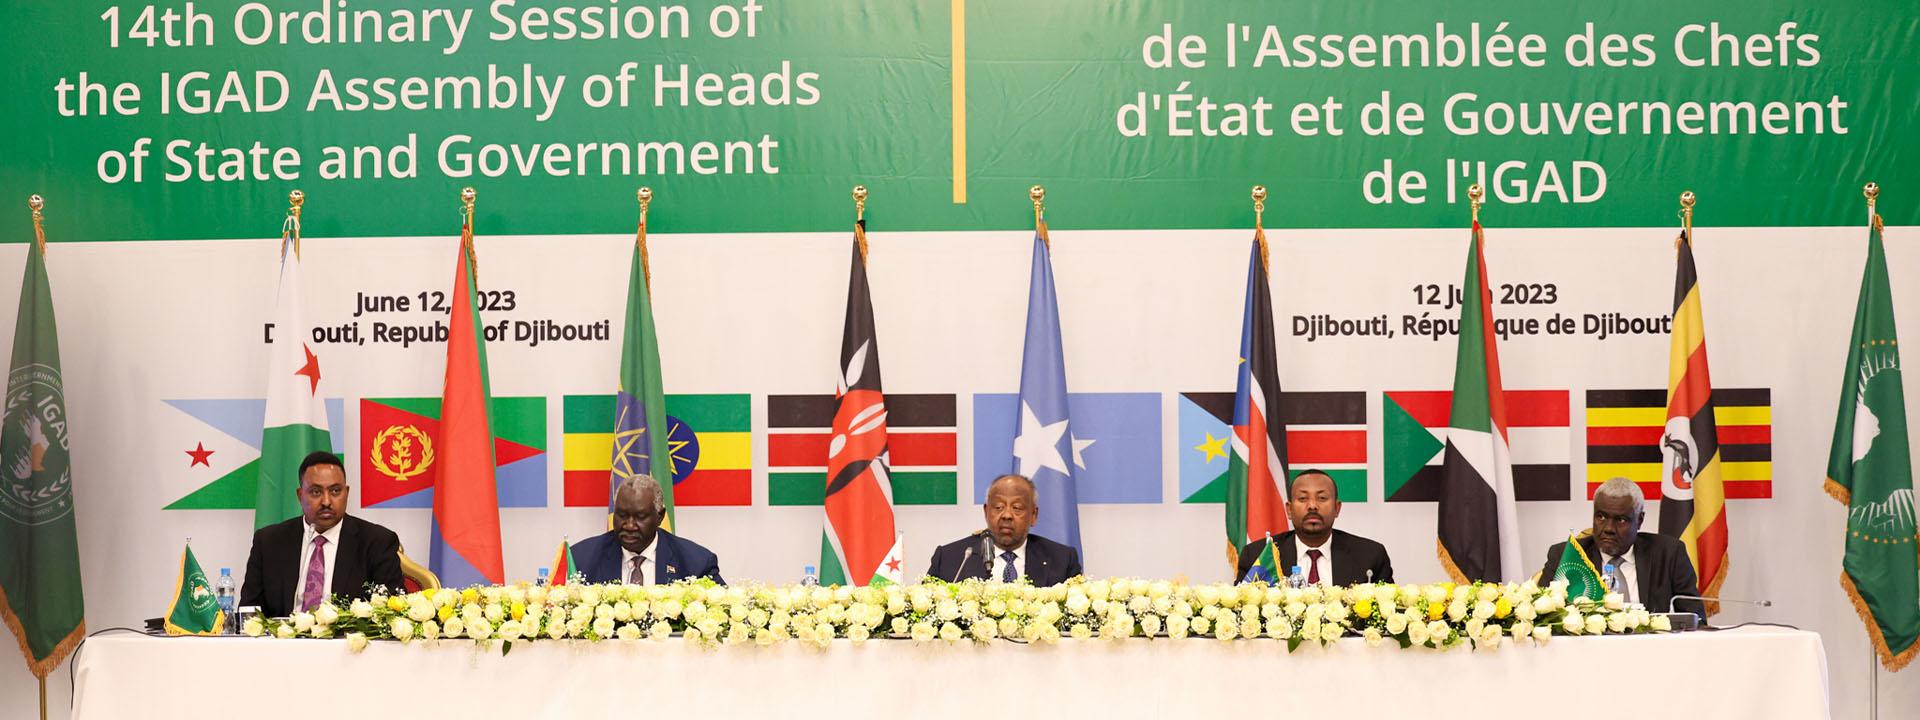 Official Statement of the IGAD Executive Secretary H.E. Workneh Gebeyehu (PhD) on the 14th Ordinary Assembly of the IGAD Heads of State and Government